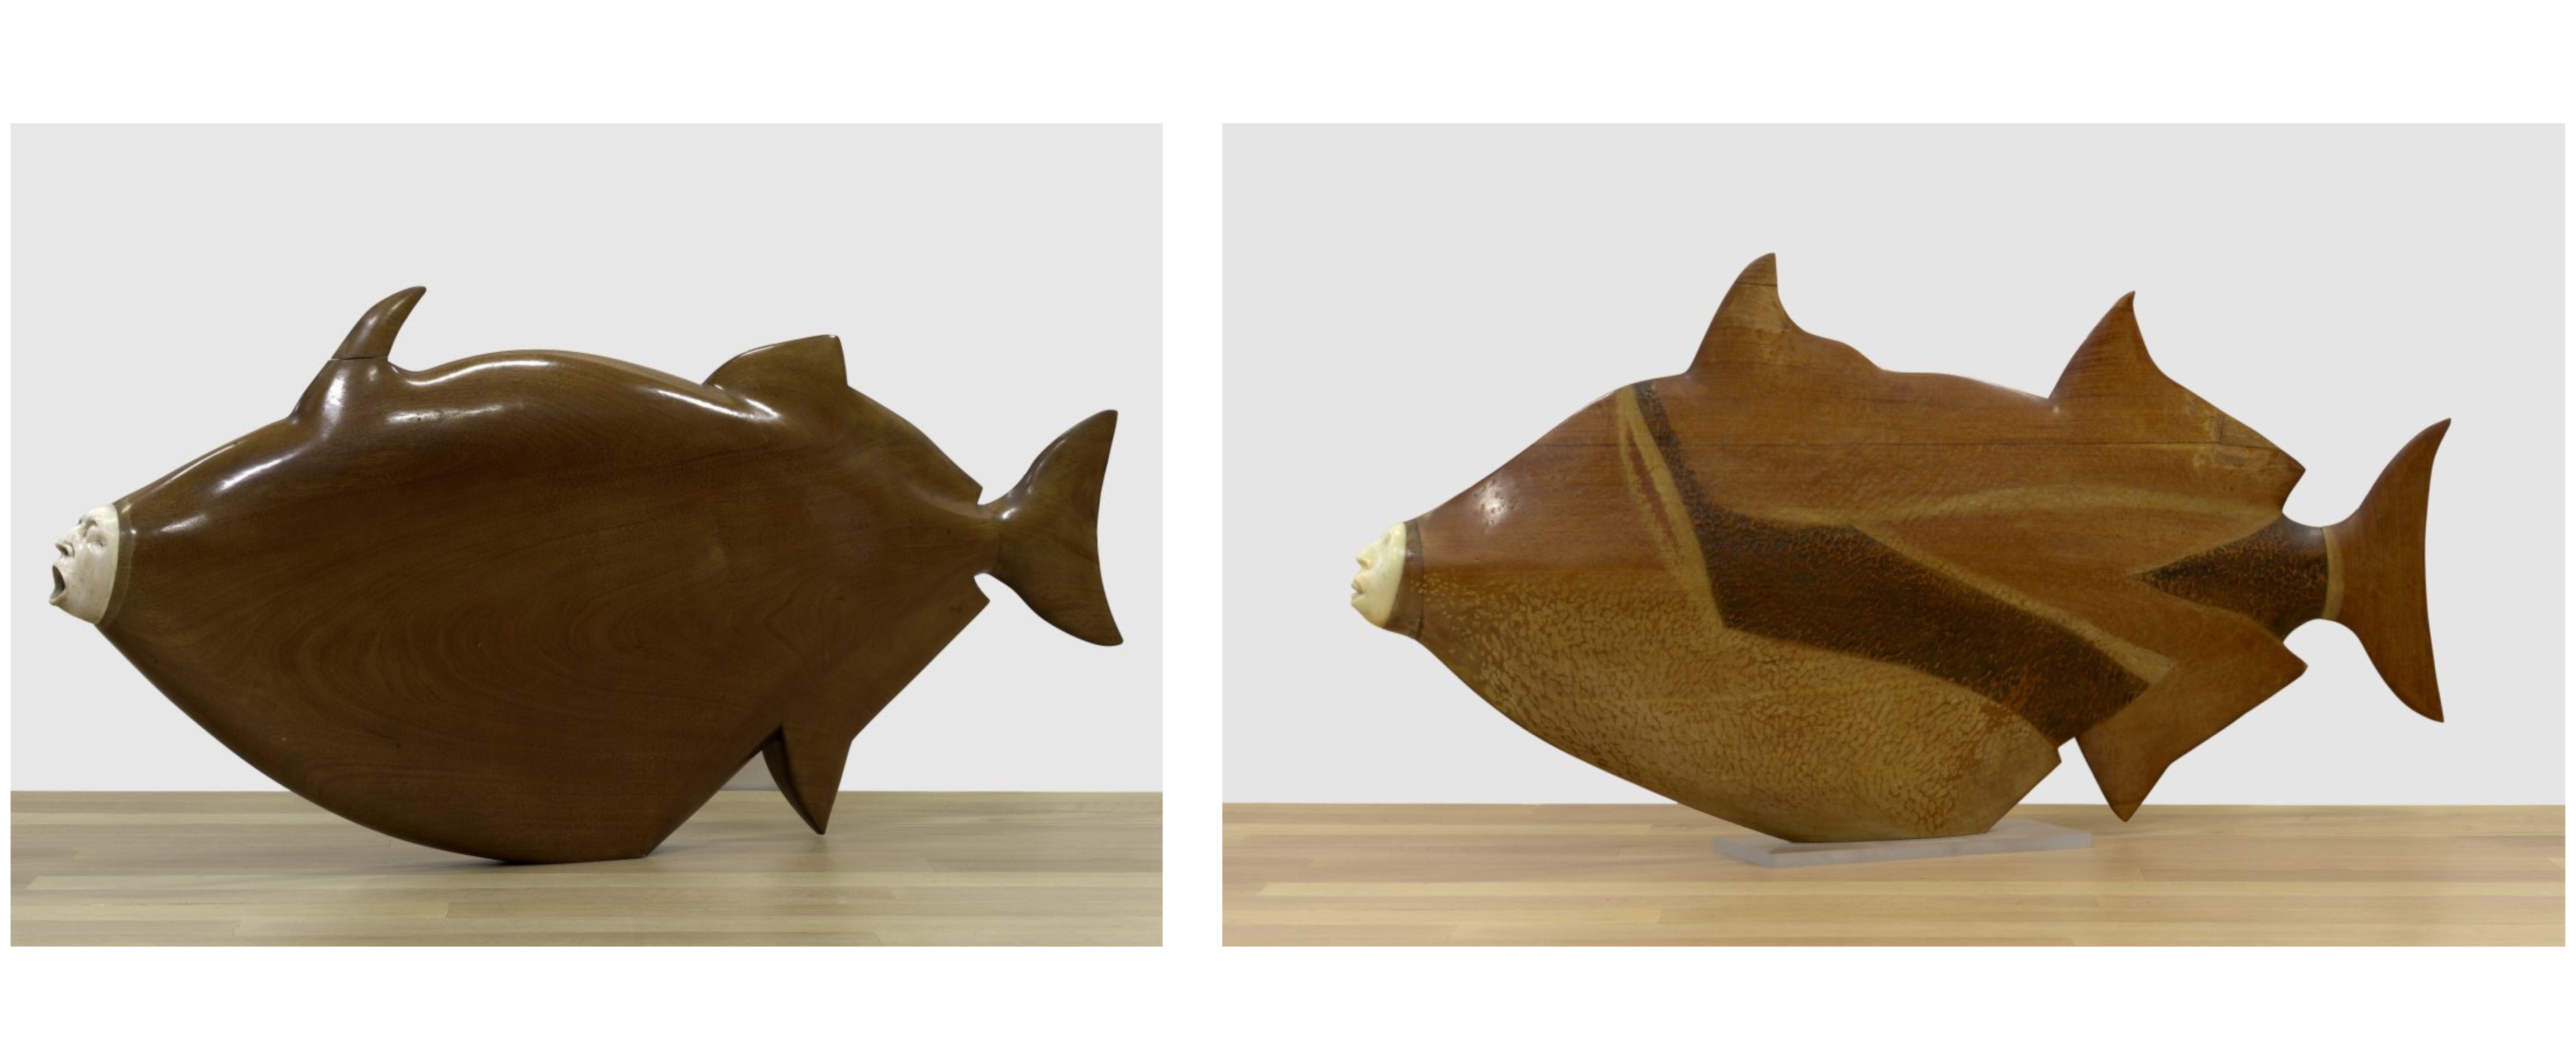 Two separate images of wooden fish sculptures with human faces 